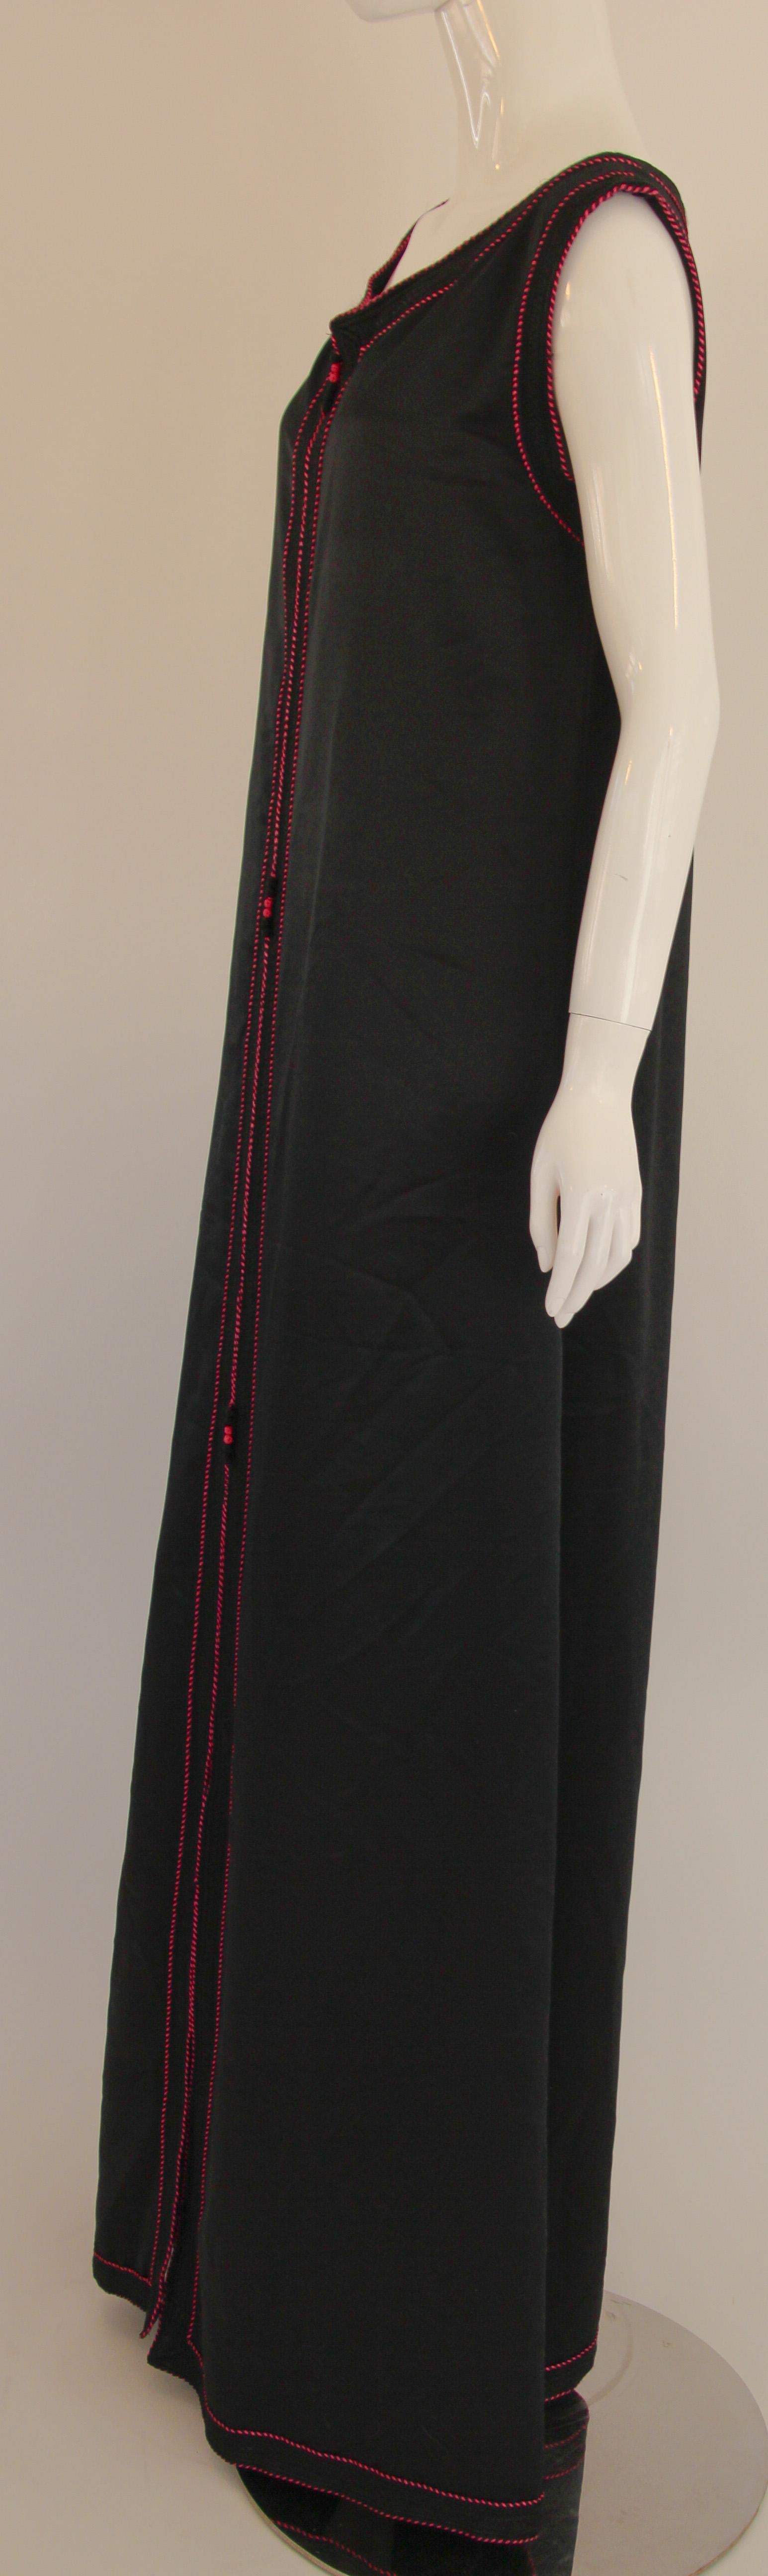 Vintage Caftan Sleeveless Black with Pink Embroidered, ca. 1980s For Sale 7